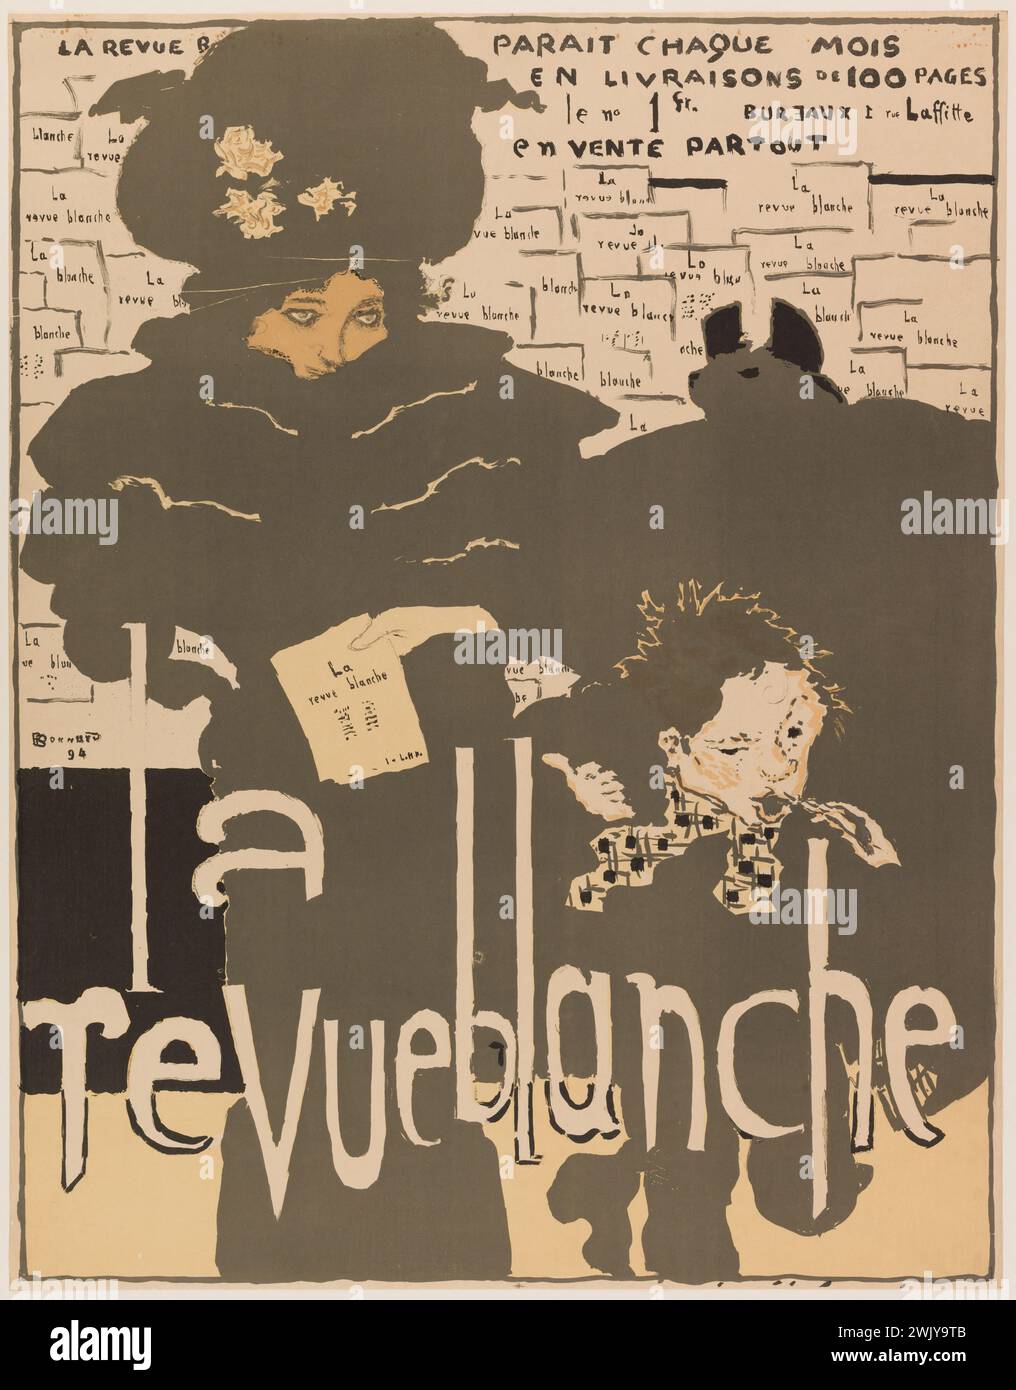 Pierre Bonnard (1867-1947). 'Poster for the' Revue Blanche '(Bouvet: 30). Lithography in four colors on spiked paper. 1894. Museum of Fine Arts of the city of Paris, small palace. 123738-1 Buy, advertising poster, anarchism, woman, the white review, reader, reader, read, artistic review, literary review, title, 19th XIX 19th 19th 19th century Stock Photo